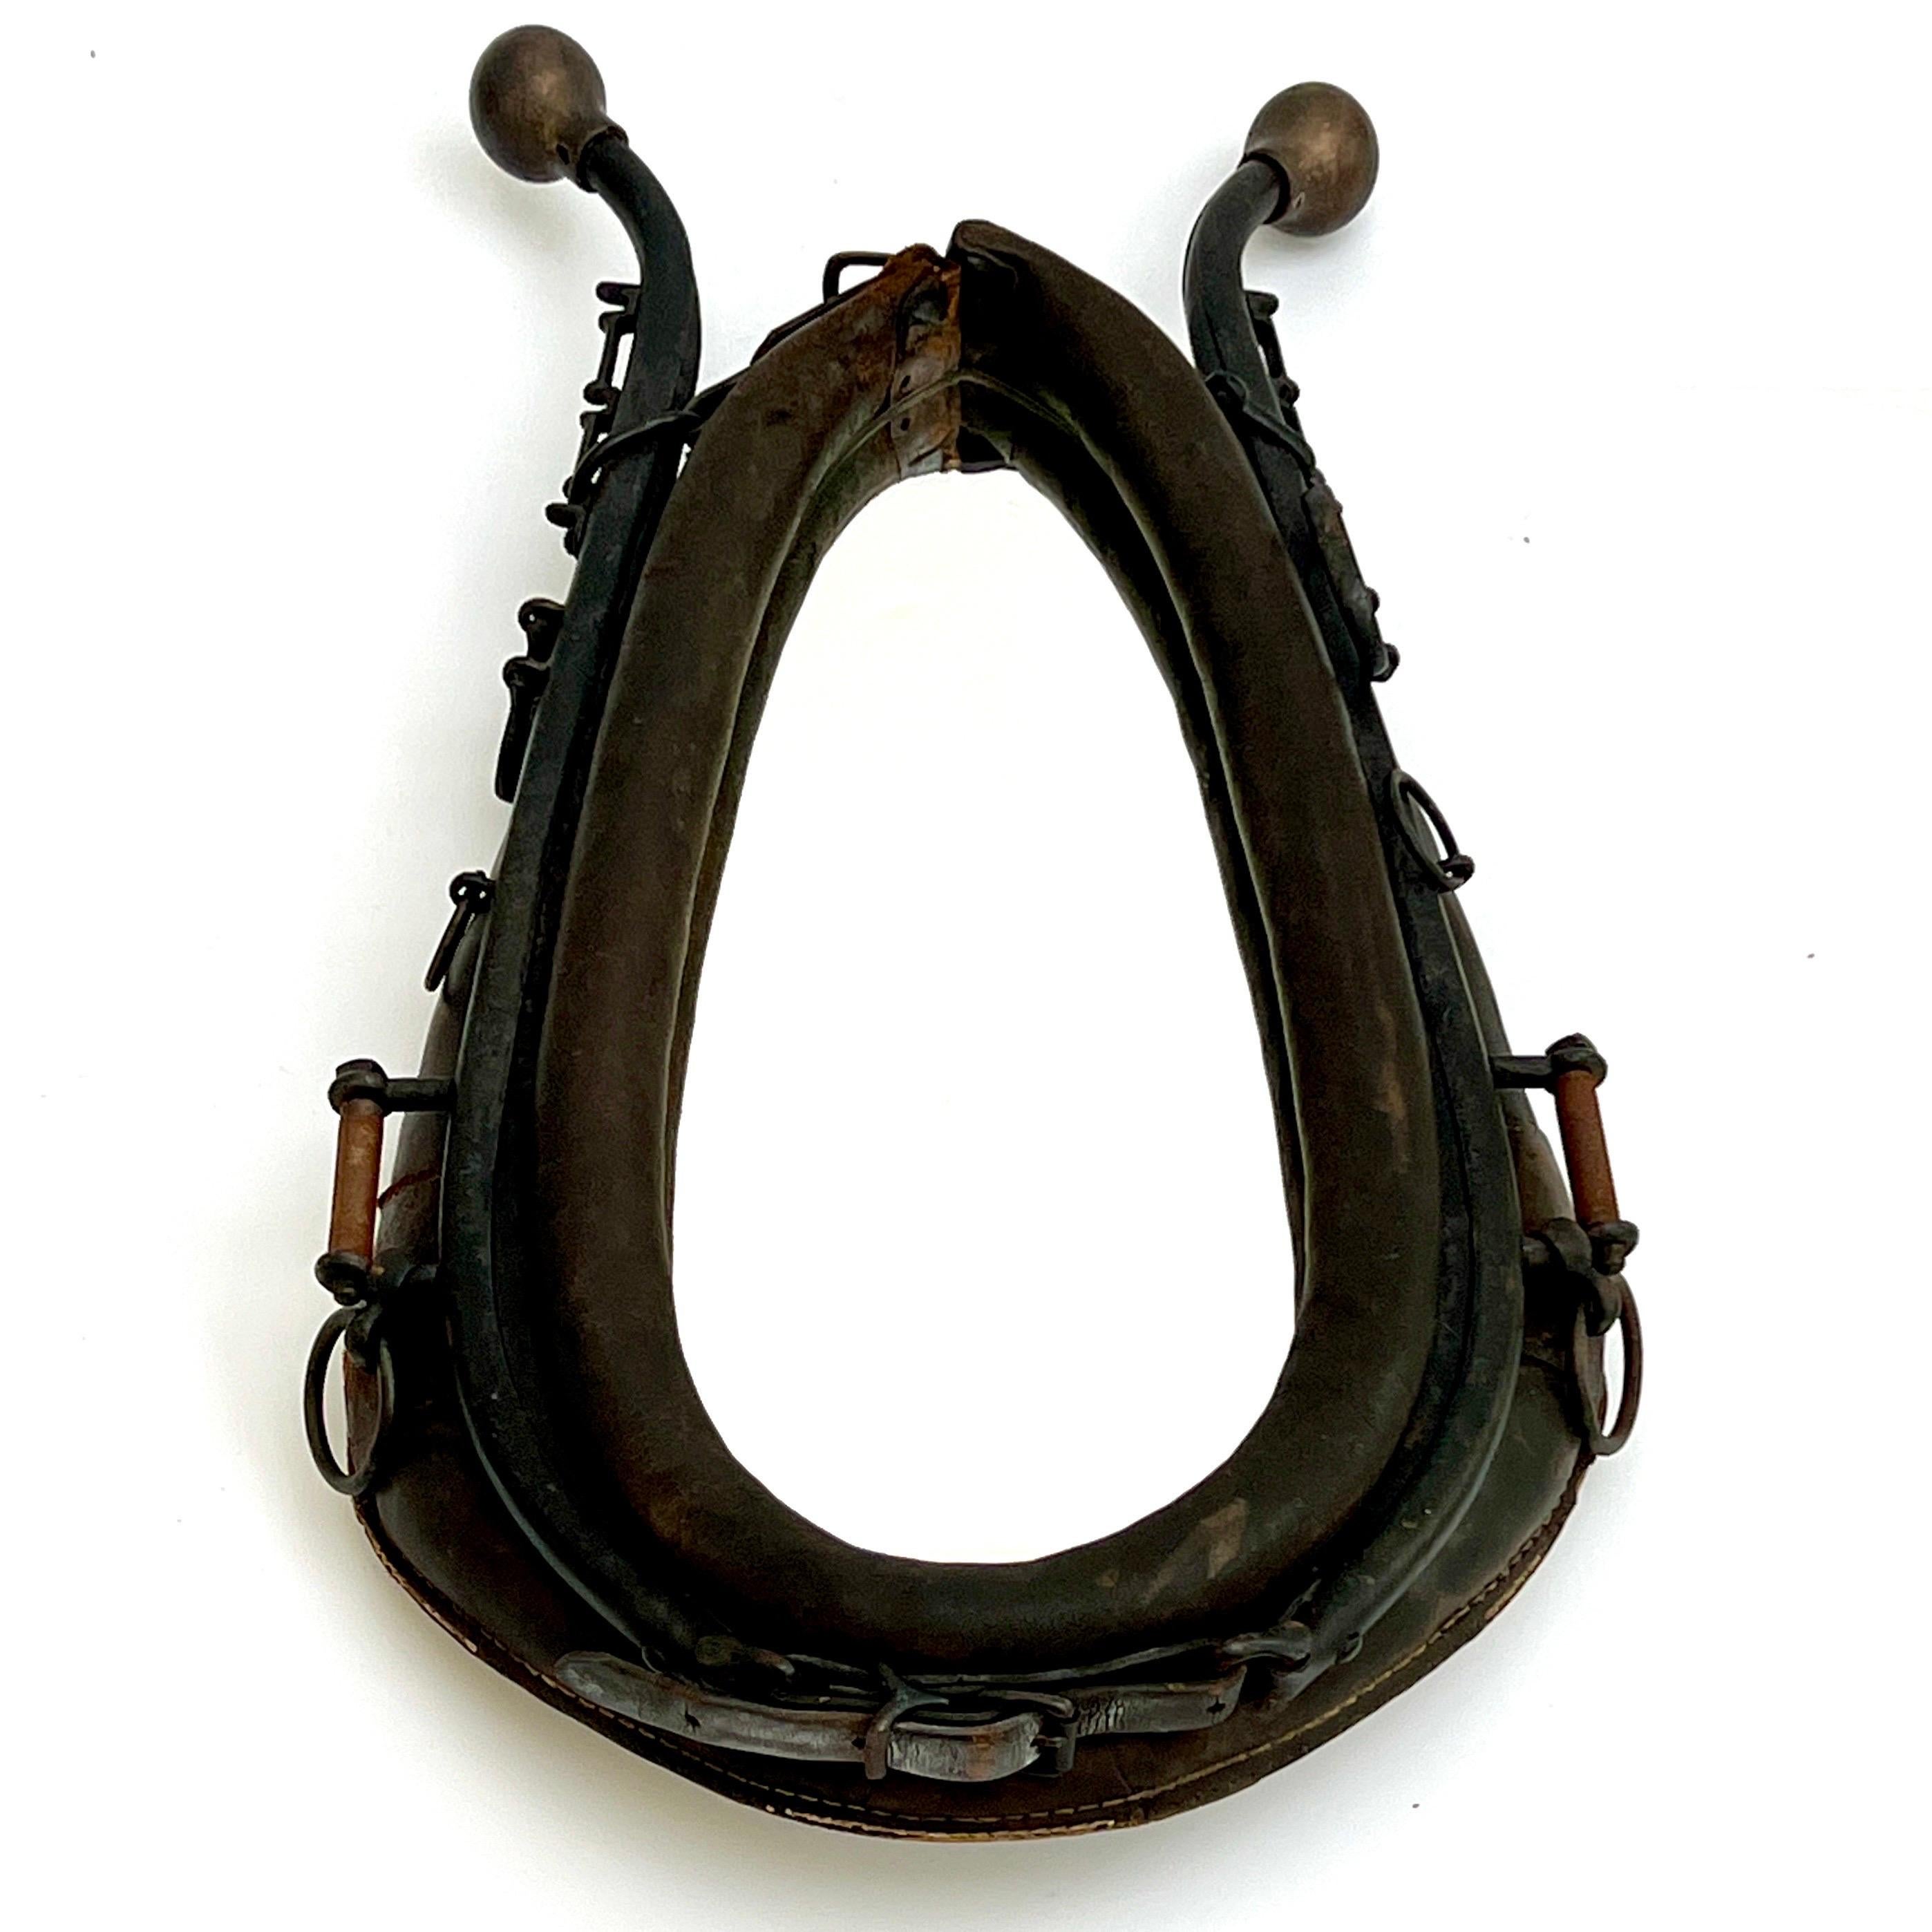 Antique Equestrian Horse Collar Mirror in Distressed Leather In Fair Condition For Sale In Fort Lauderdale, FL